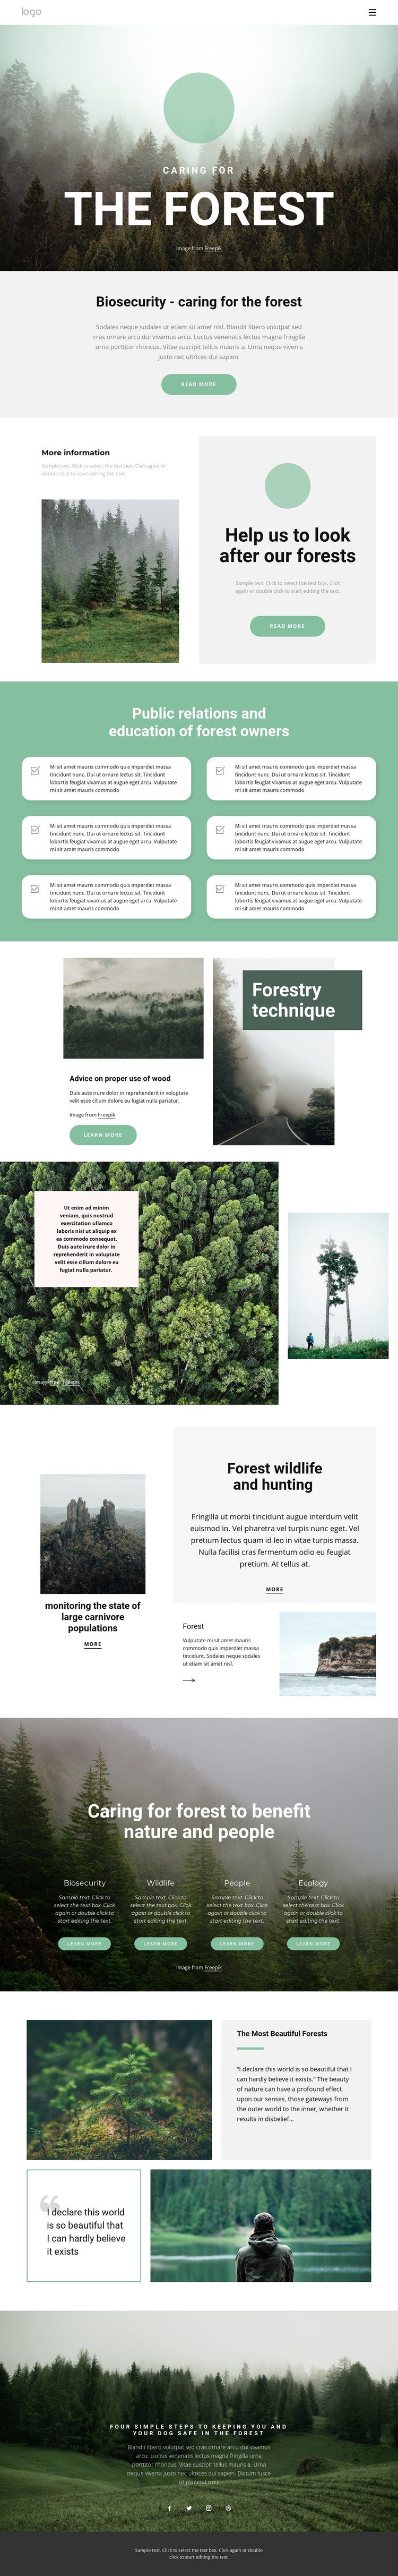 Caring for parks and forests CSS Template